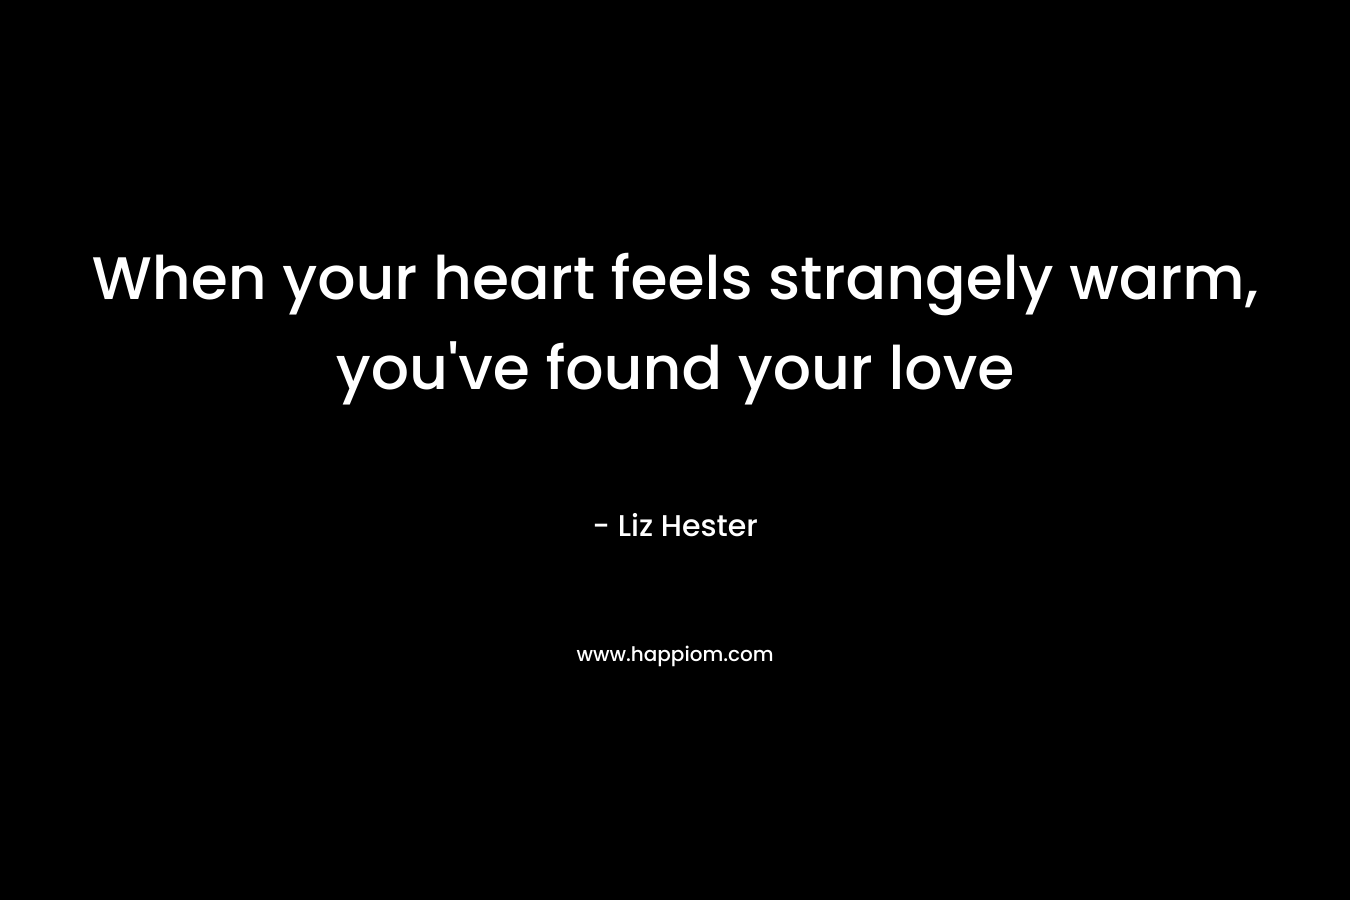 When your heart feels strangely warm, you’ve found your love – Liz Hester